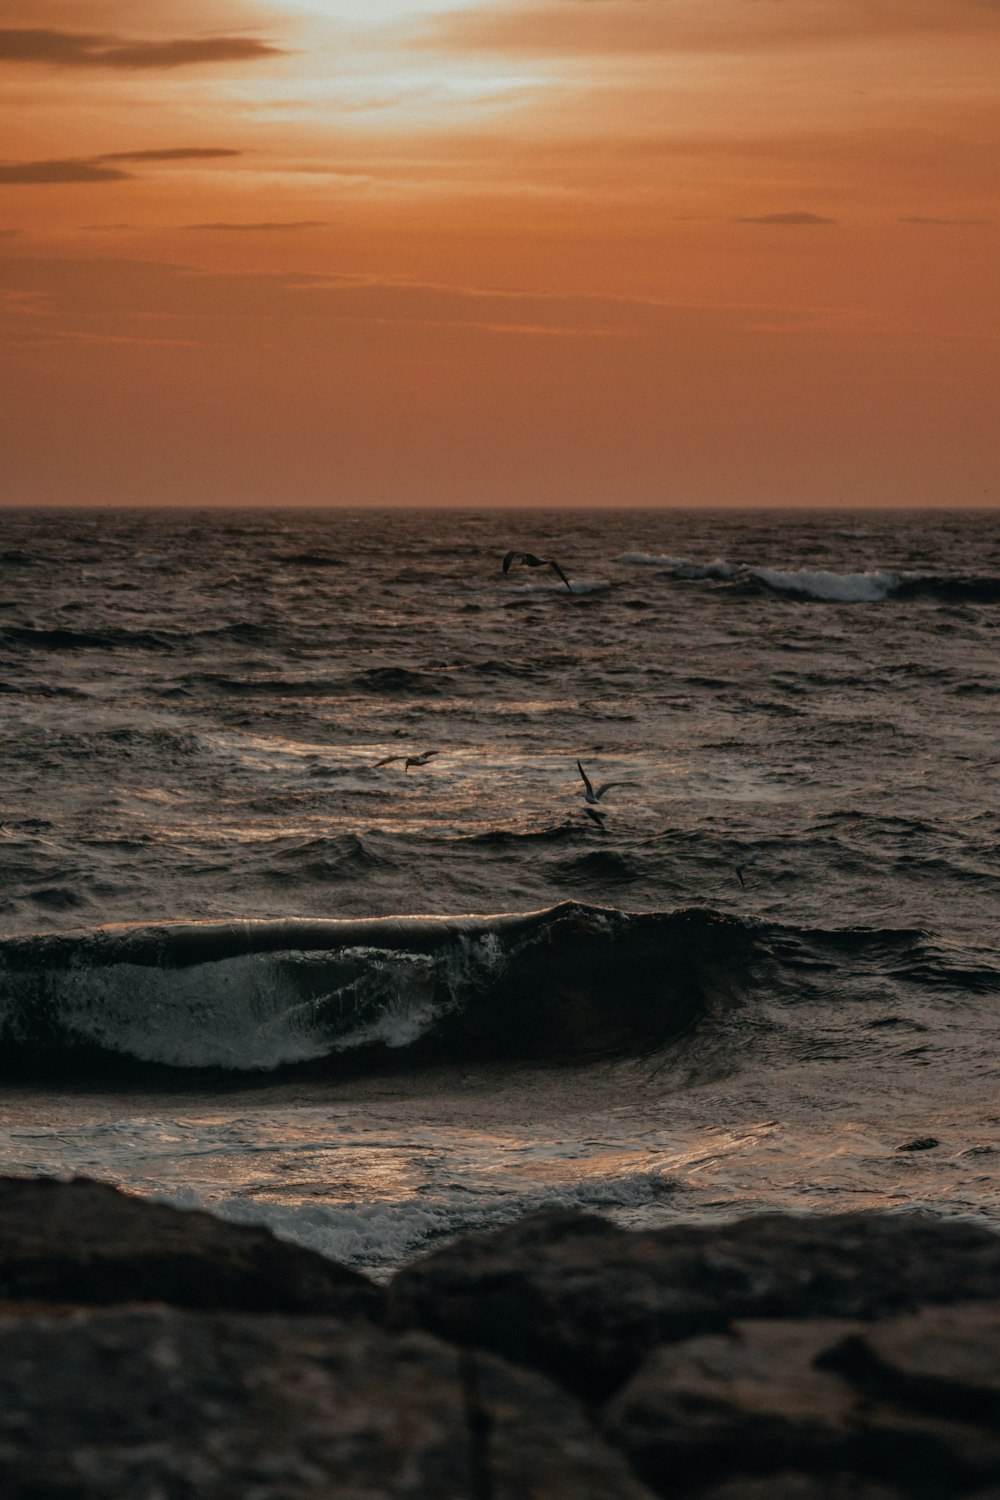 person surfing on sea waves during sunset